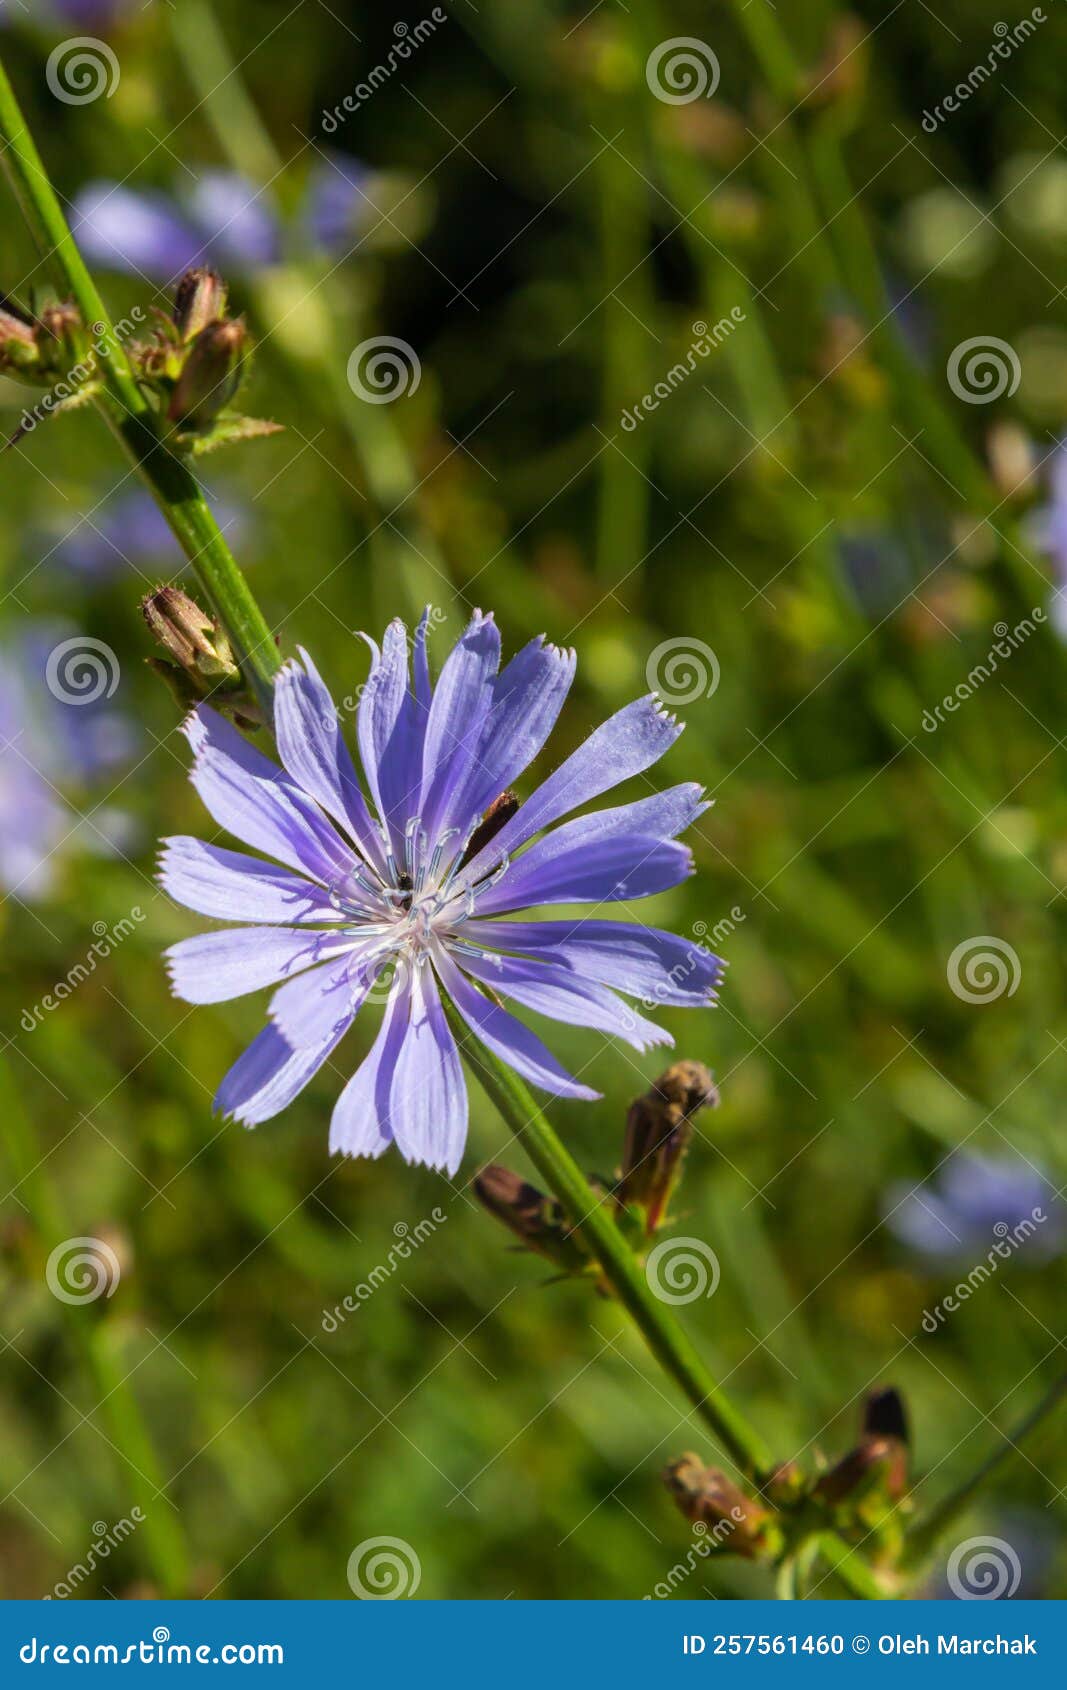 blue chicory flowers, close up. violet cichorium intybus blossoms, called as sailor, chicory, coffee weed, or succory is a